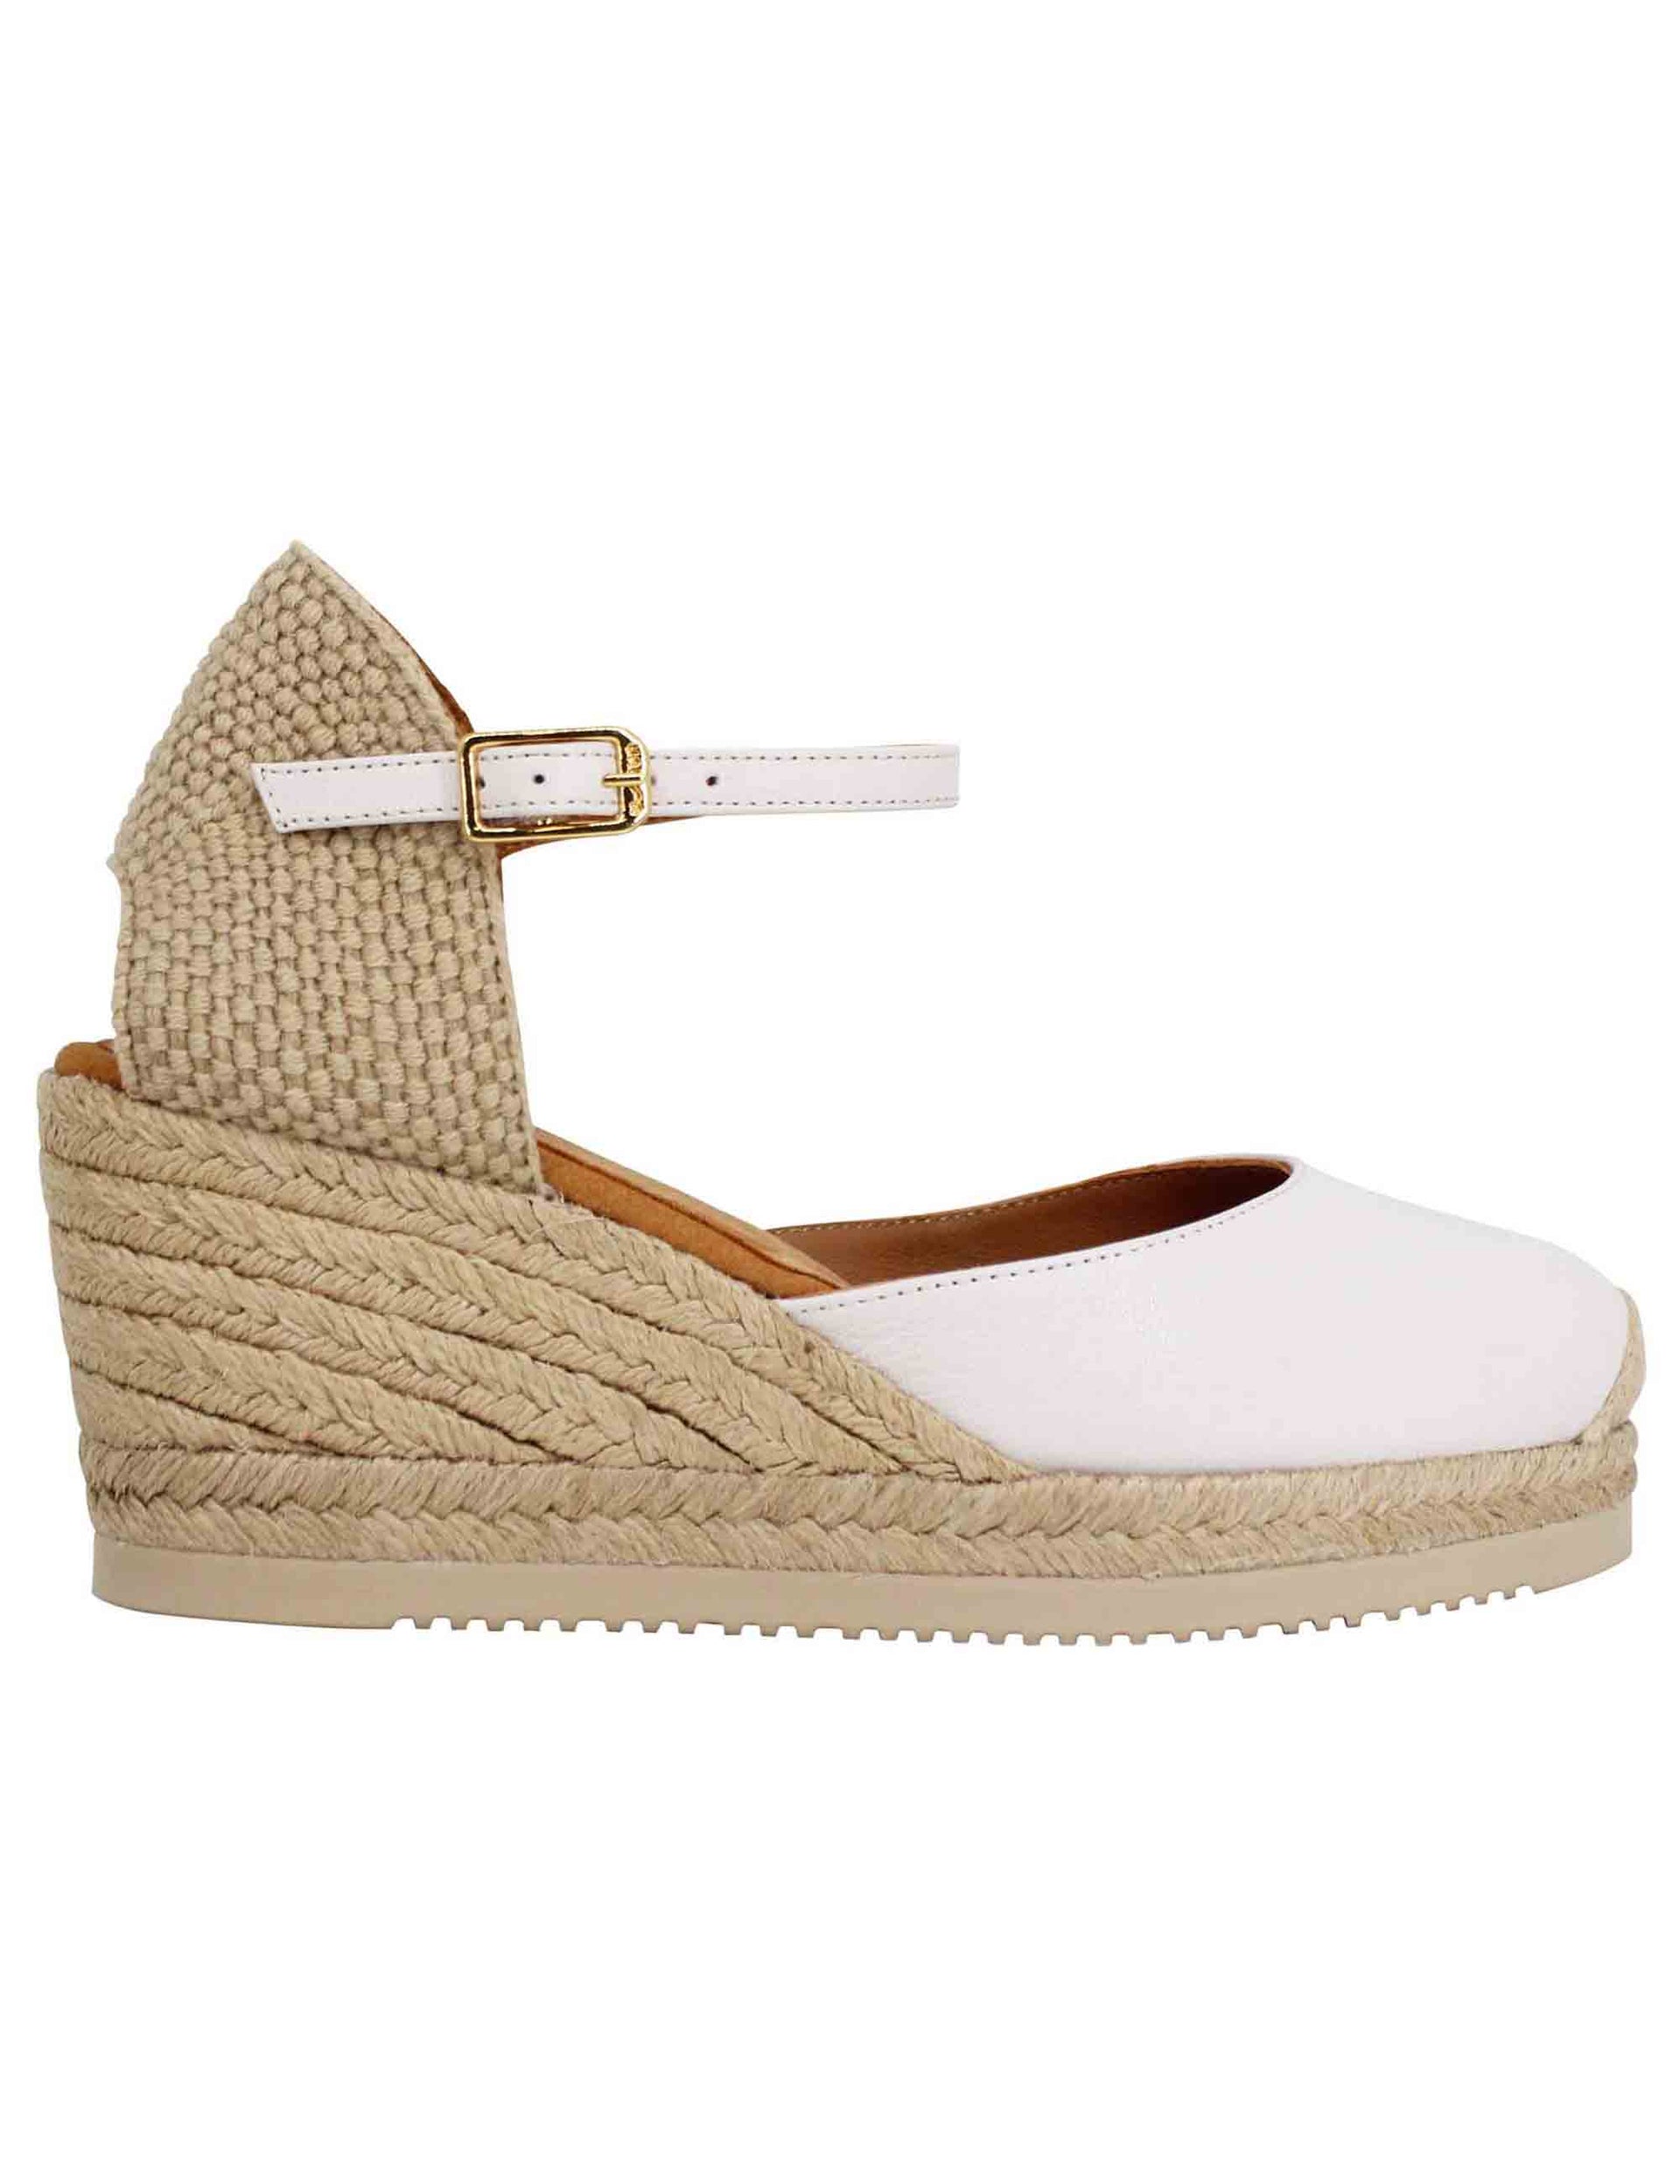 Women's espadrilles sandals in ivory leather with ankle strap